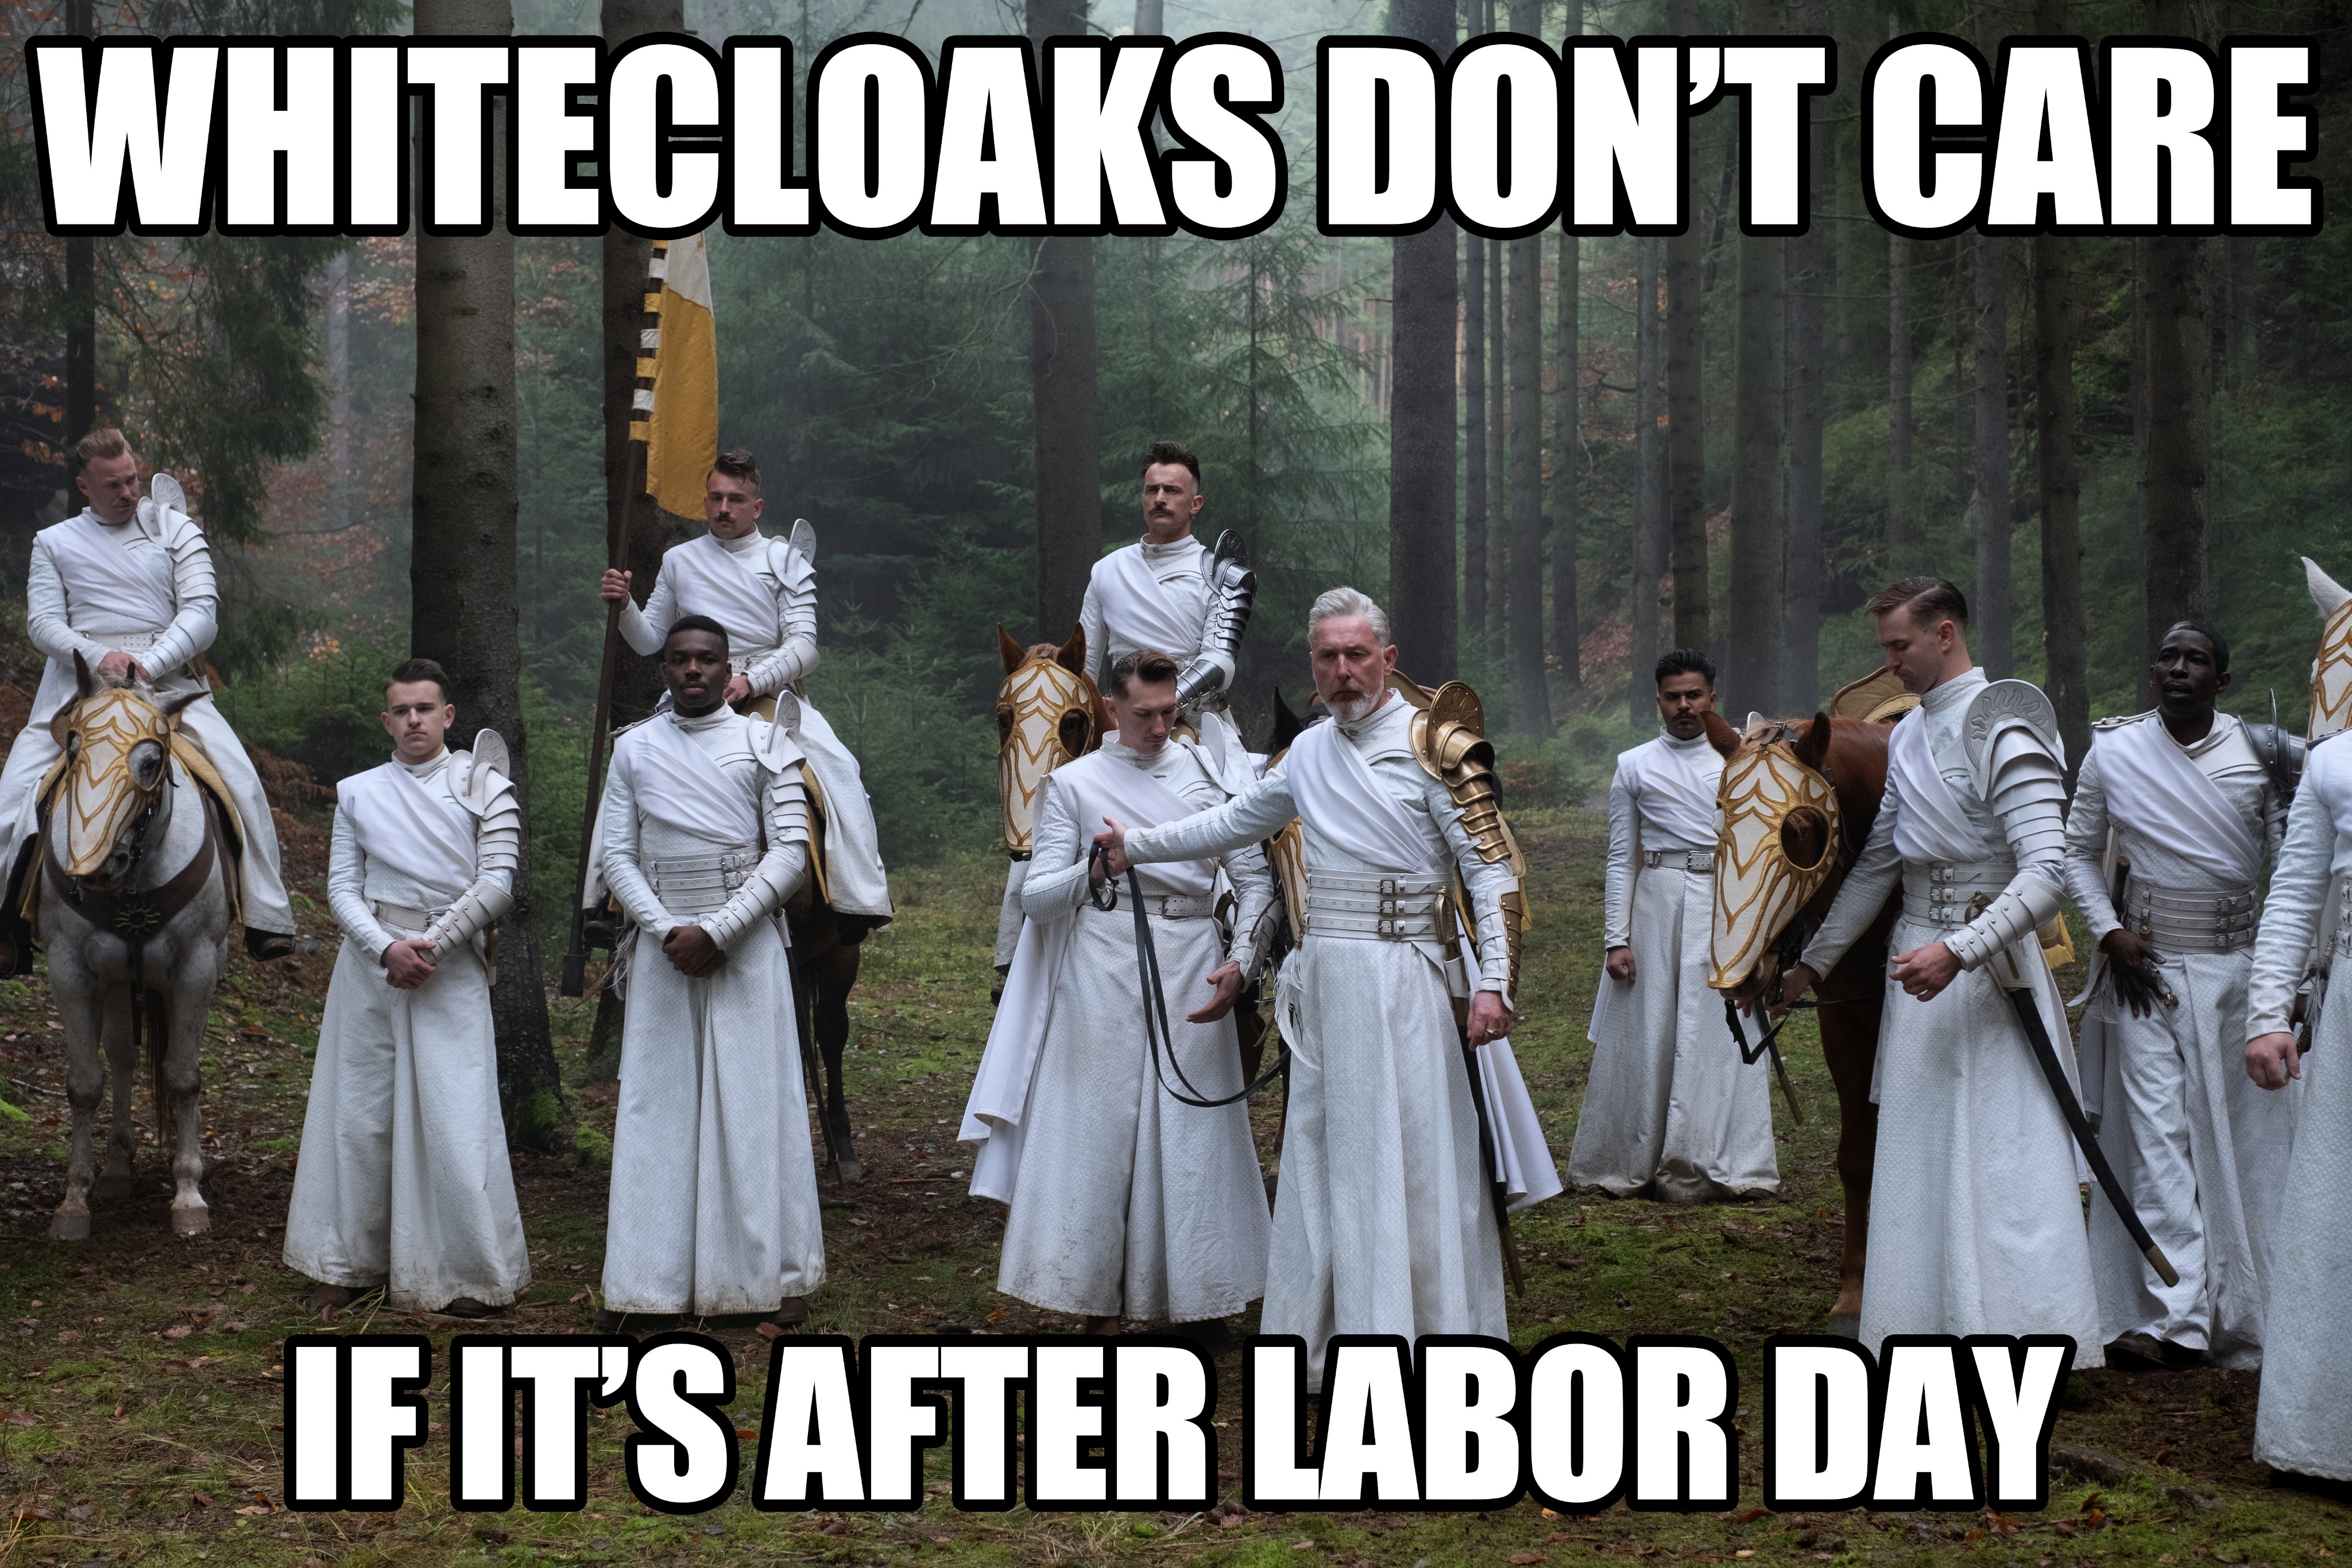 A picture of a group of Whitecloaks in a forest with the text “Whitecloaks don't care if it's after Labor Day"